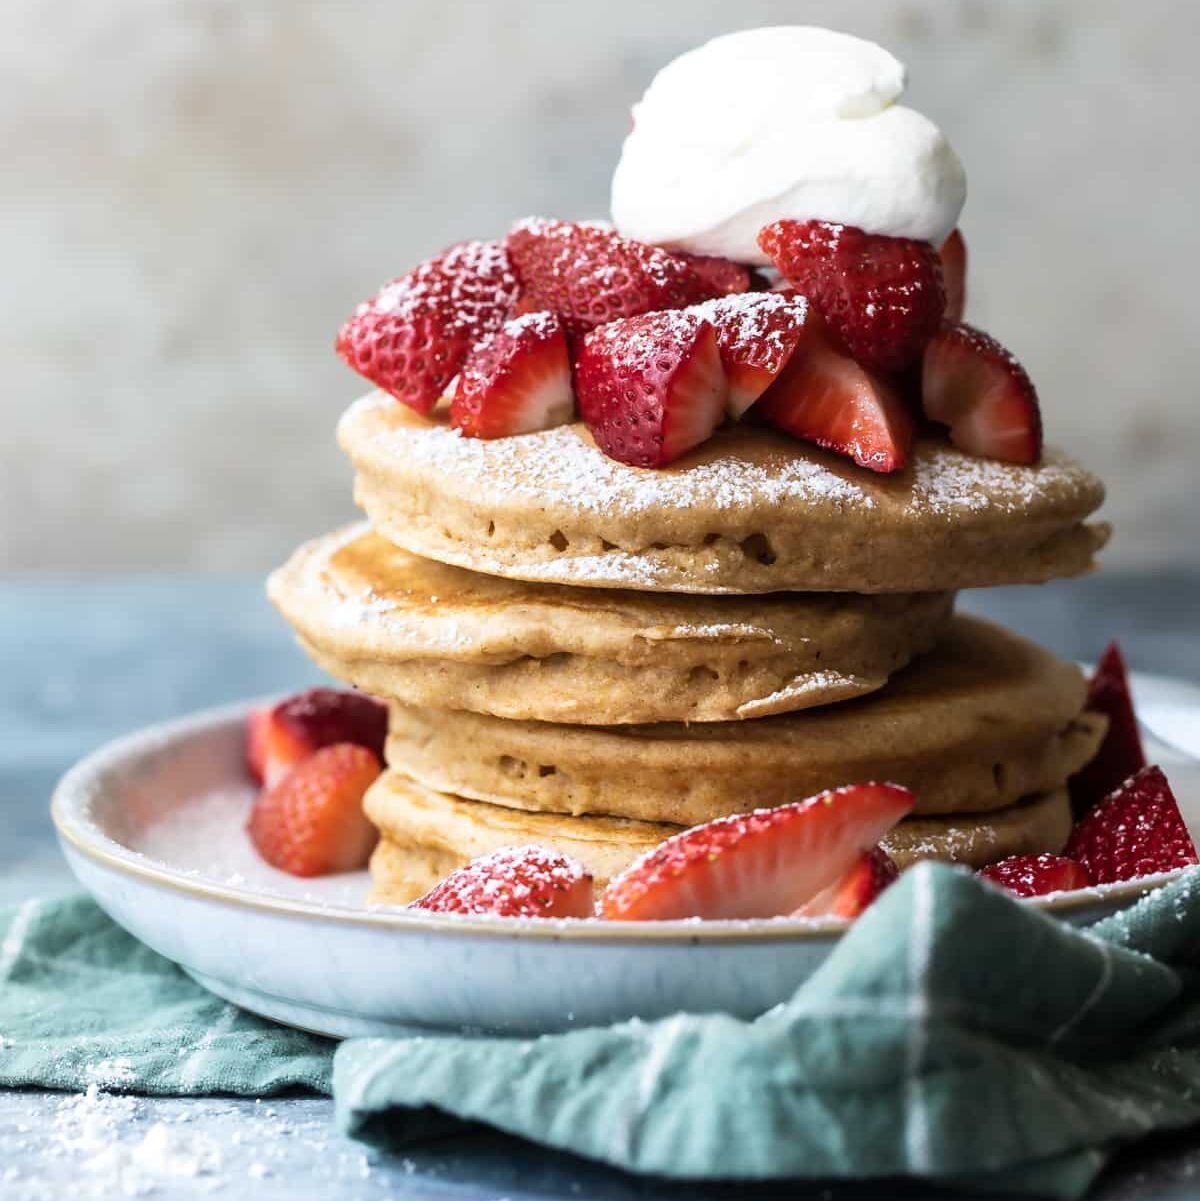 A stack of healthy pancakes with strawberries, whipped cream and powdered sugar.